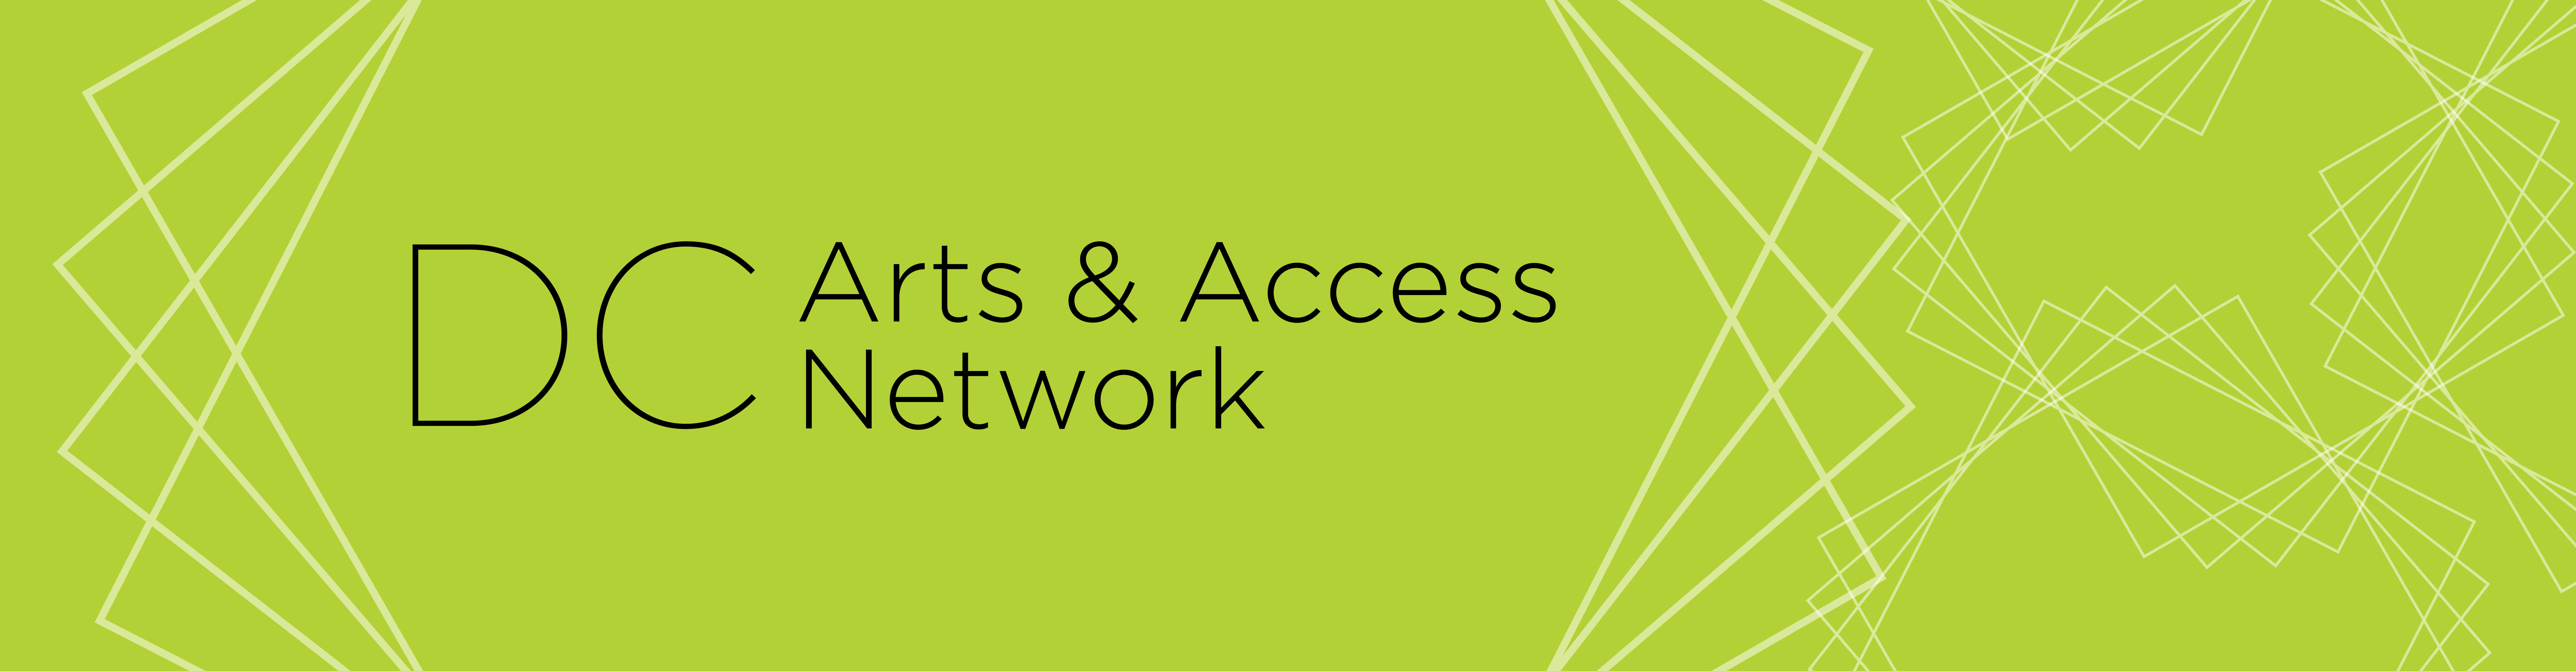 DC Arts & Access Network (Washington, DC disability organization for people with disabilities)